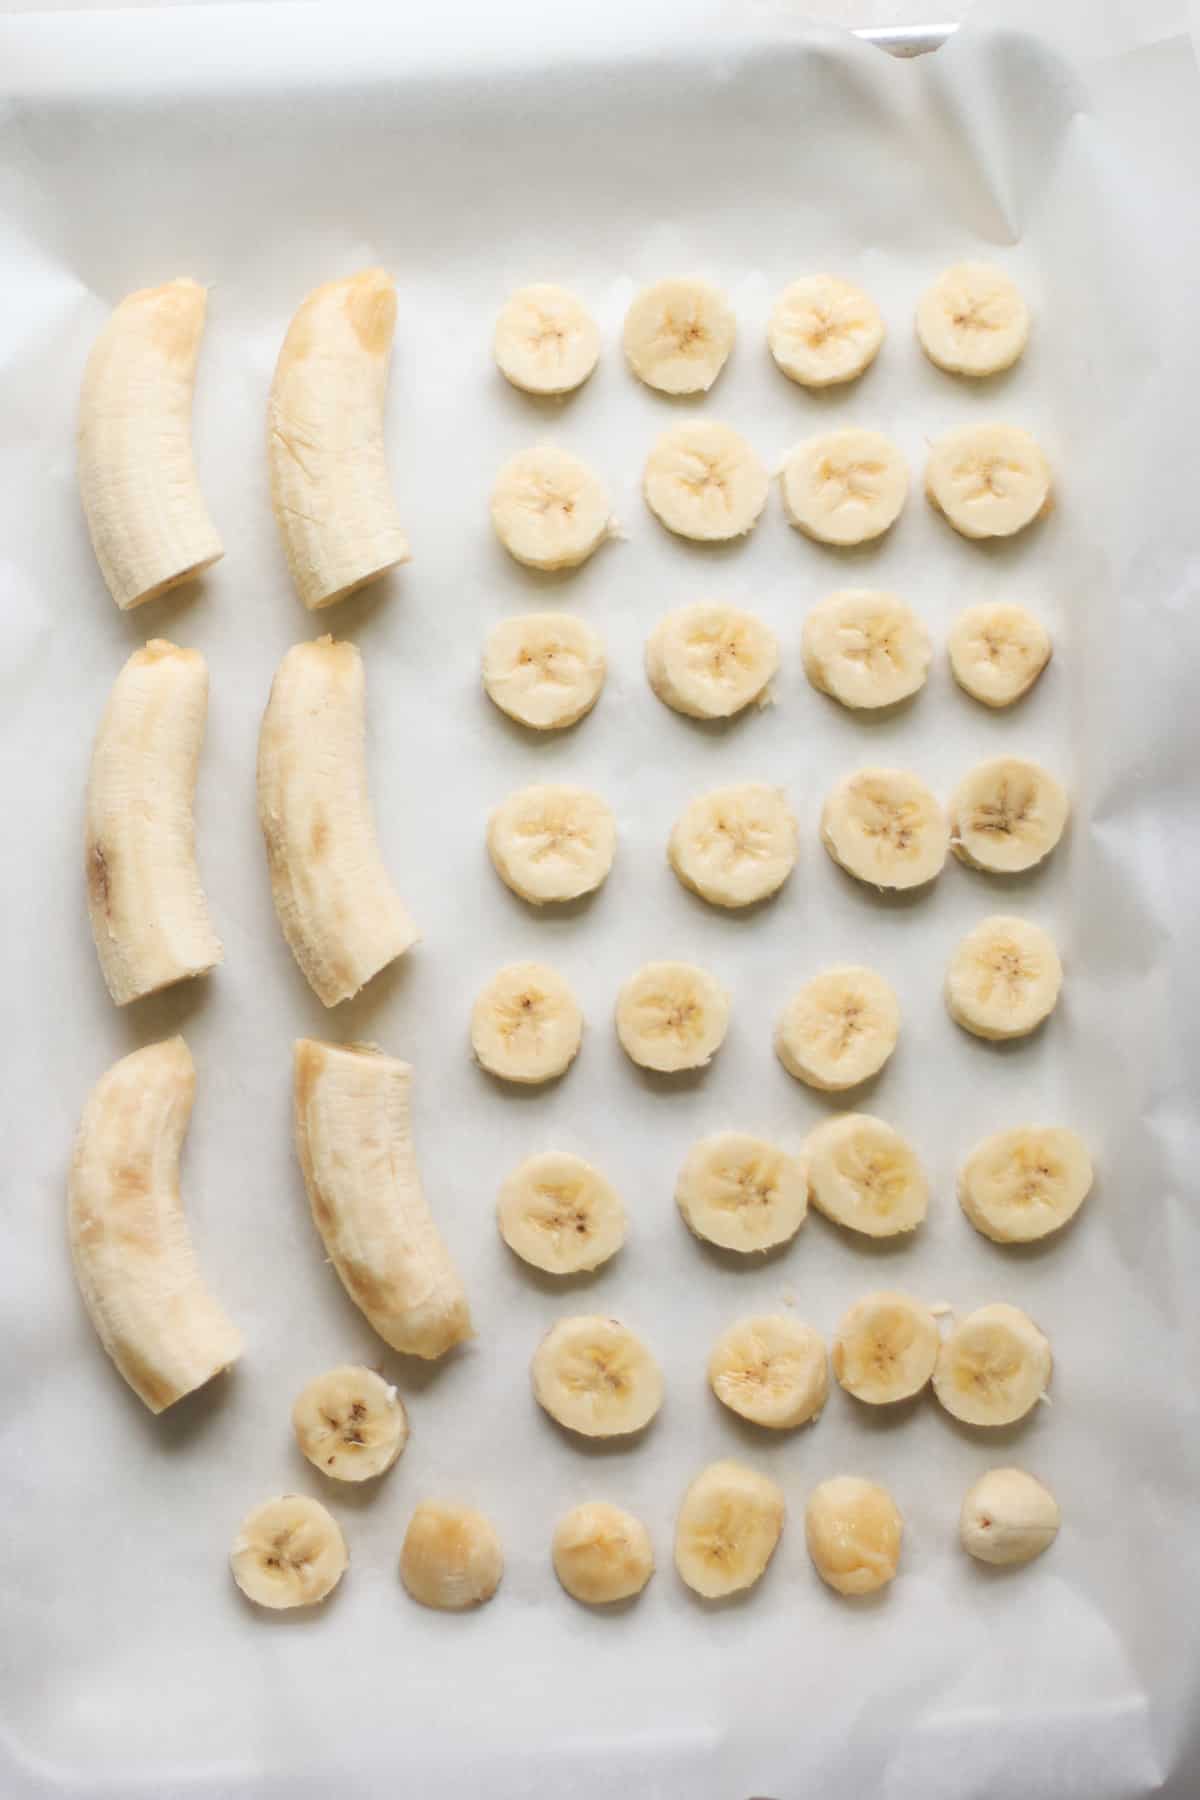 Sliced and halved bananas placed on a lined baking sheet.